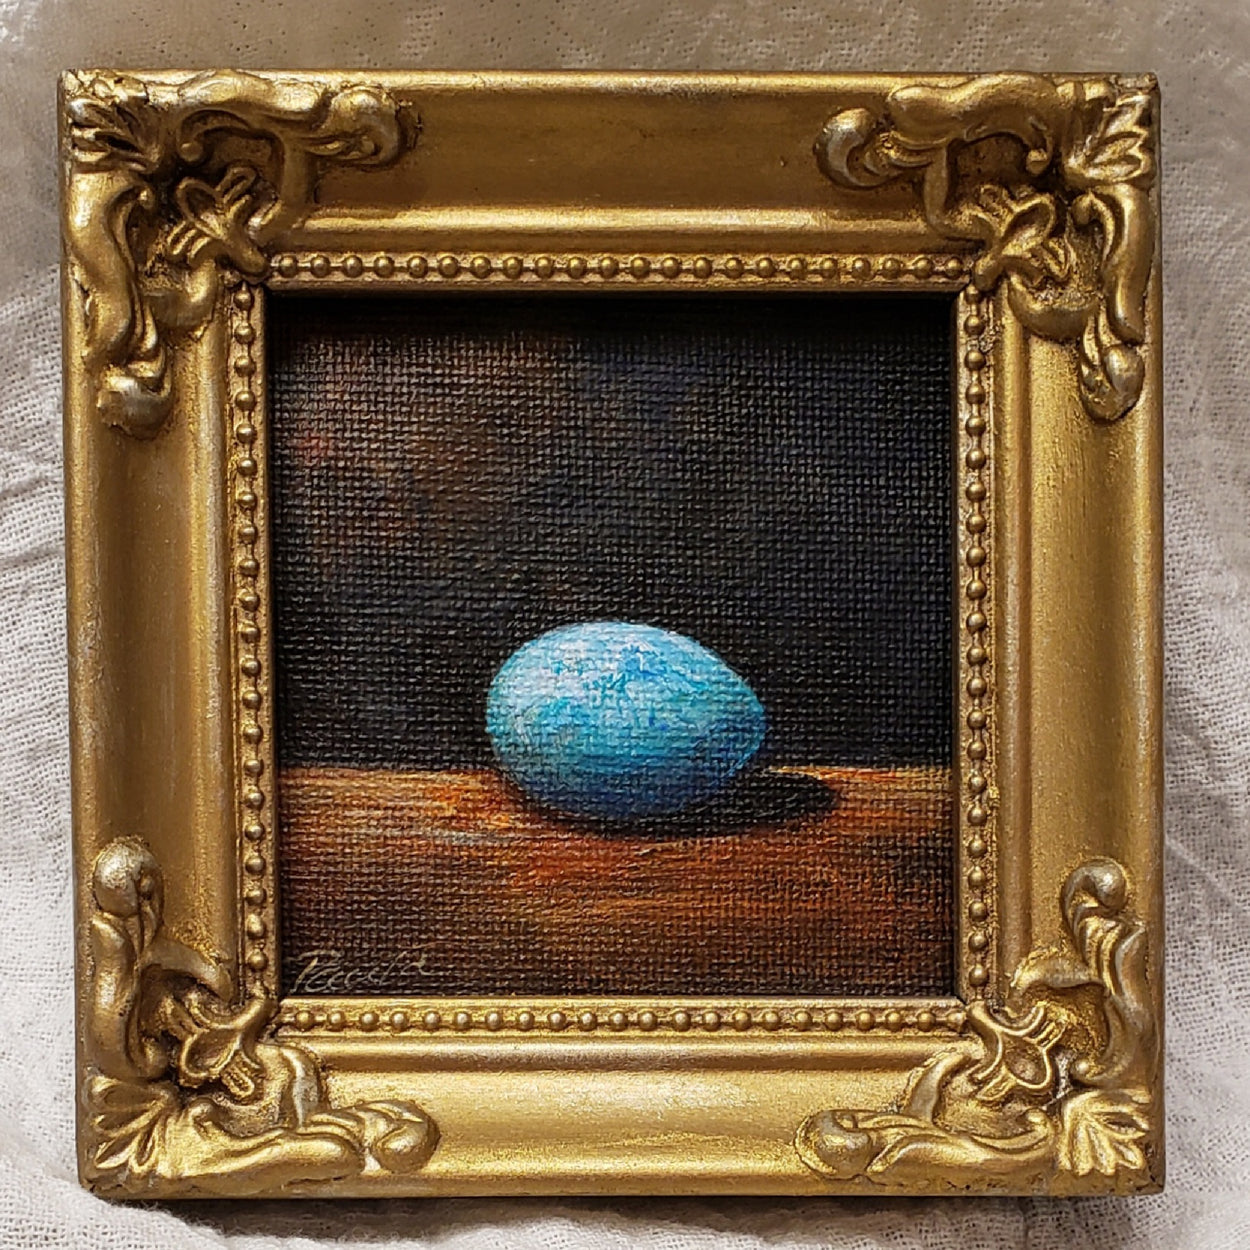 The sweetest tiniest little painting of a bright aqua egg... Titled... "Keep Shining" painting is 3x3.. framed in a tiny little fancy gold frame.